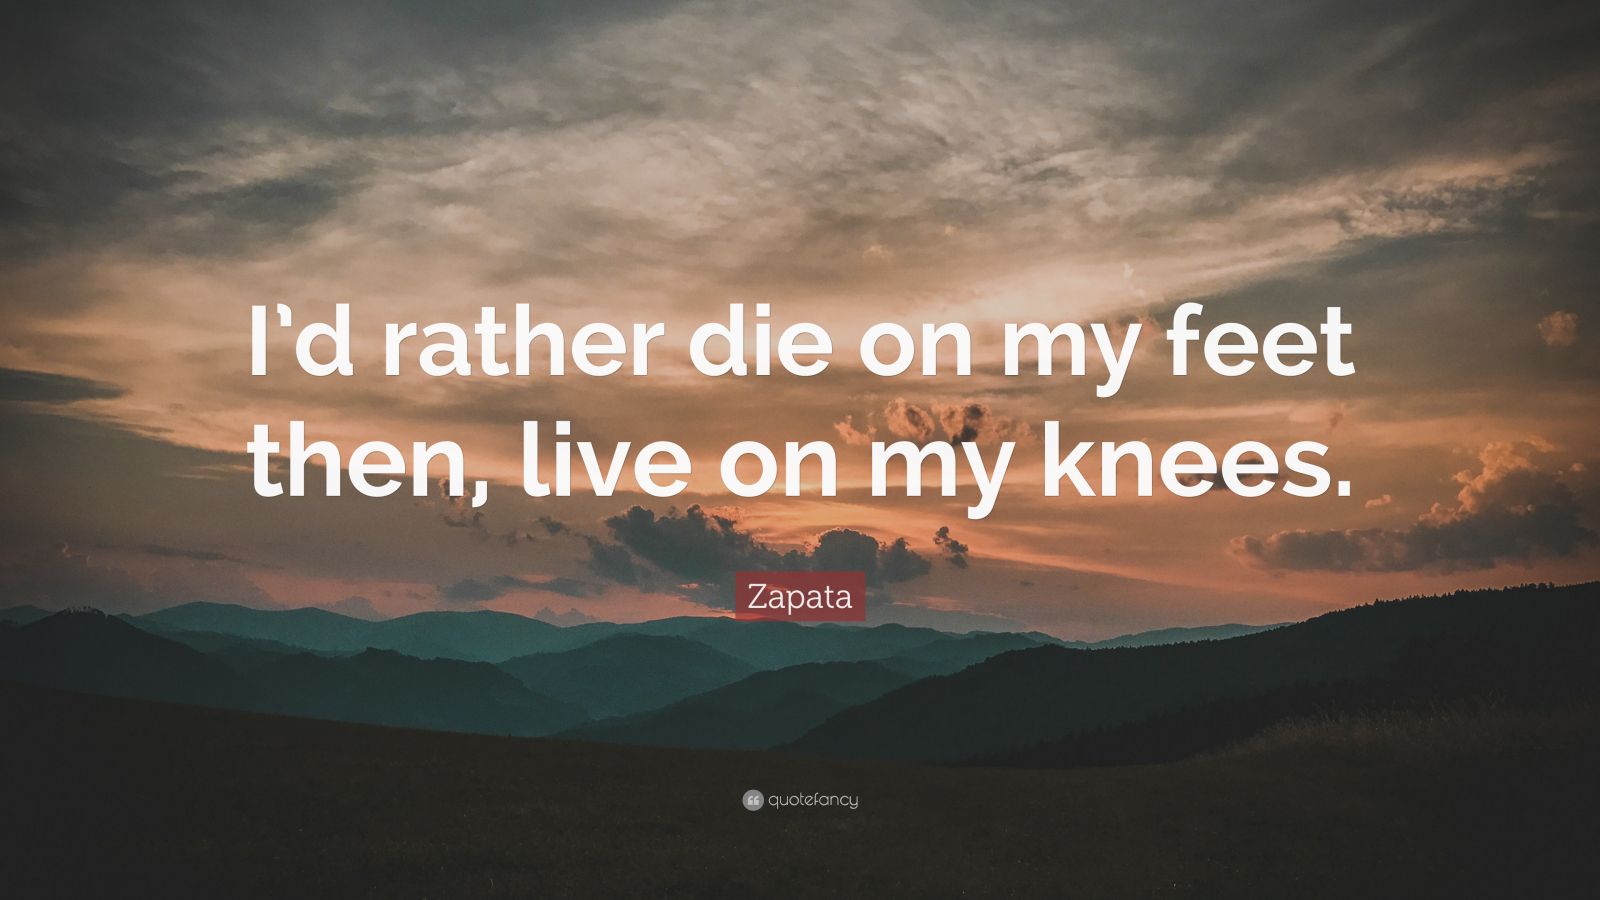 Zapata Quote: “I’d rather die on my feet then, live on my knees.”